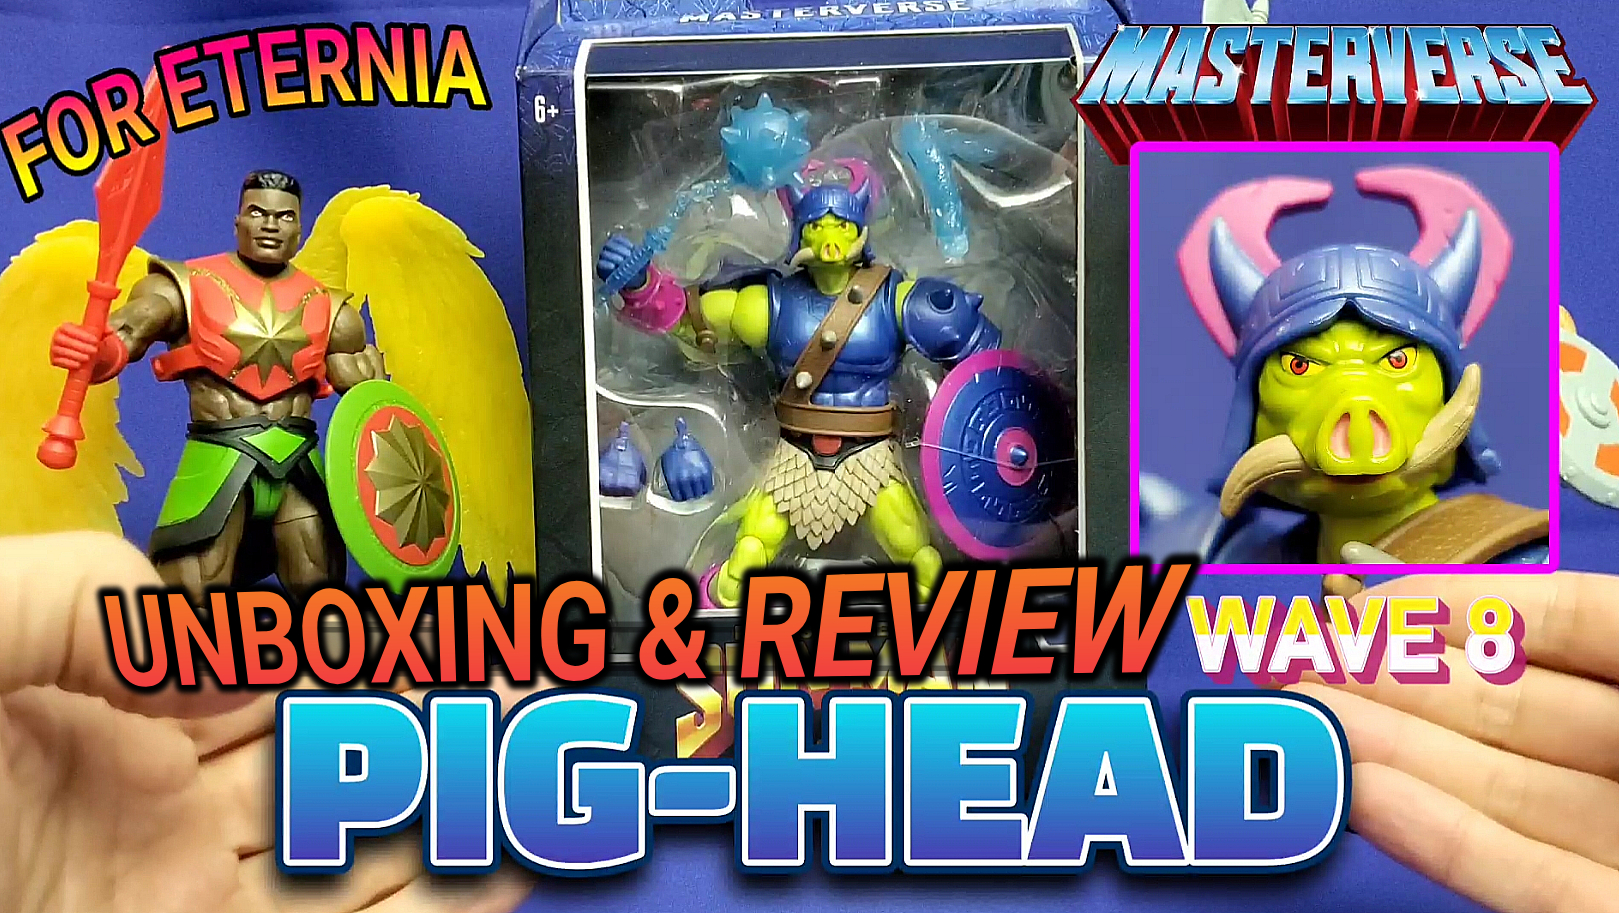 Watch our UNBOXING & REVIEW of Pig-Head, the Wave 8 Rulers of the Sun Masterverse figure